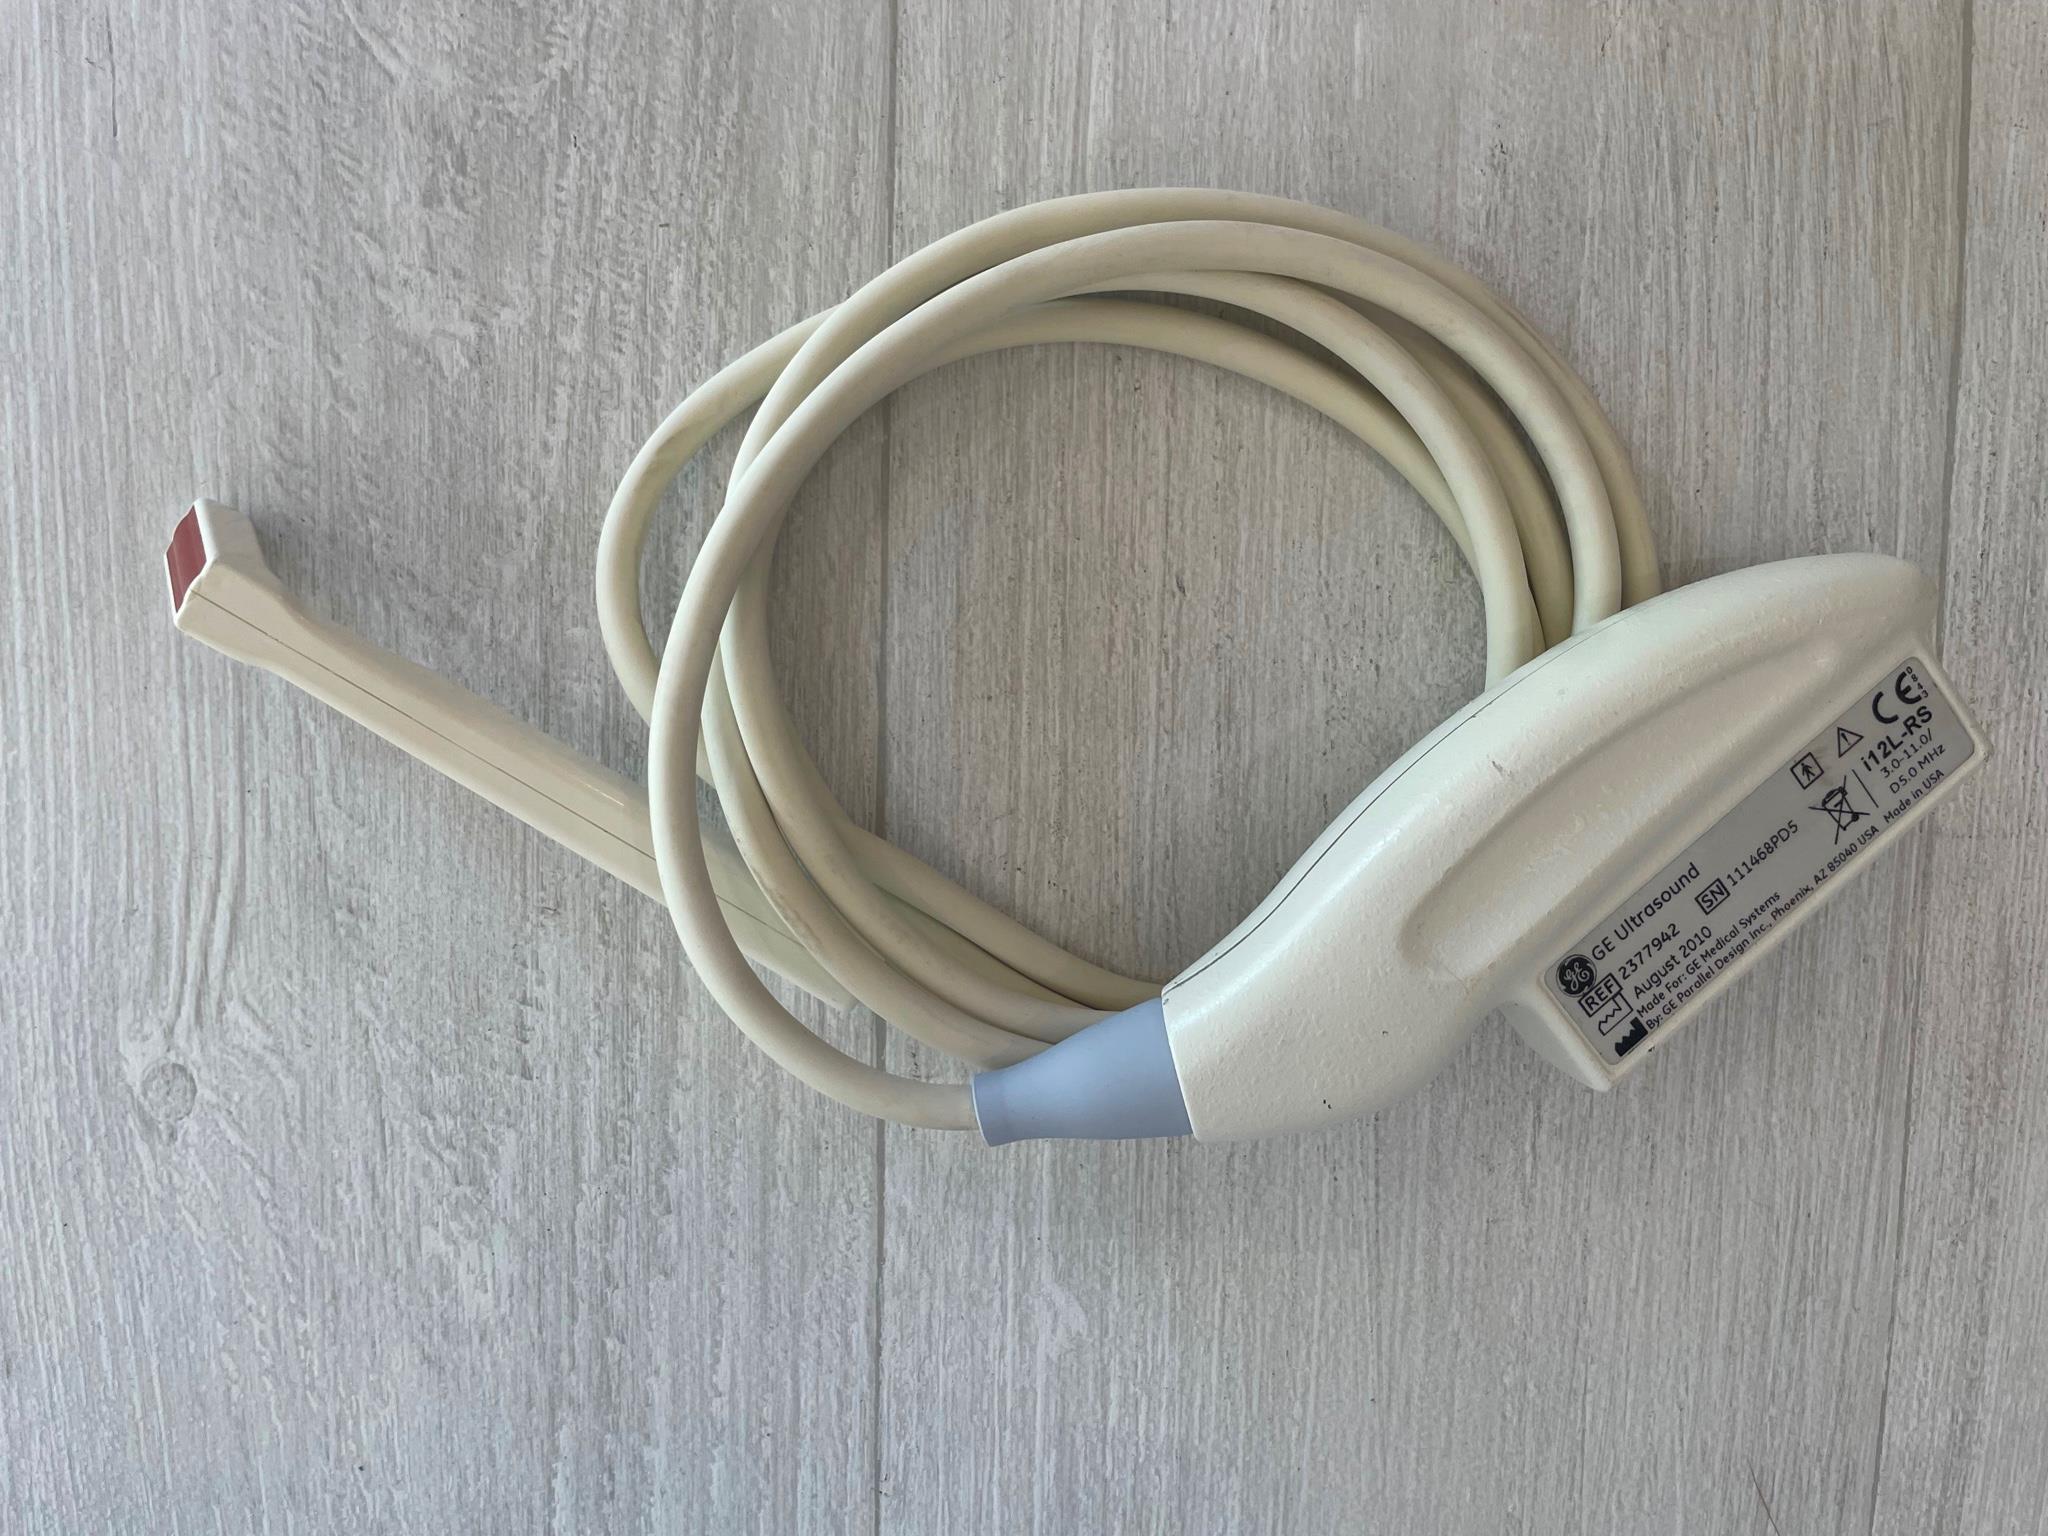 GE i12L-RS Compact Ultrasound Probe Transducer 2010 DIAGNOSTIC ULTRASOUND MACHINES FOR SALE